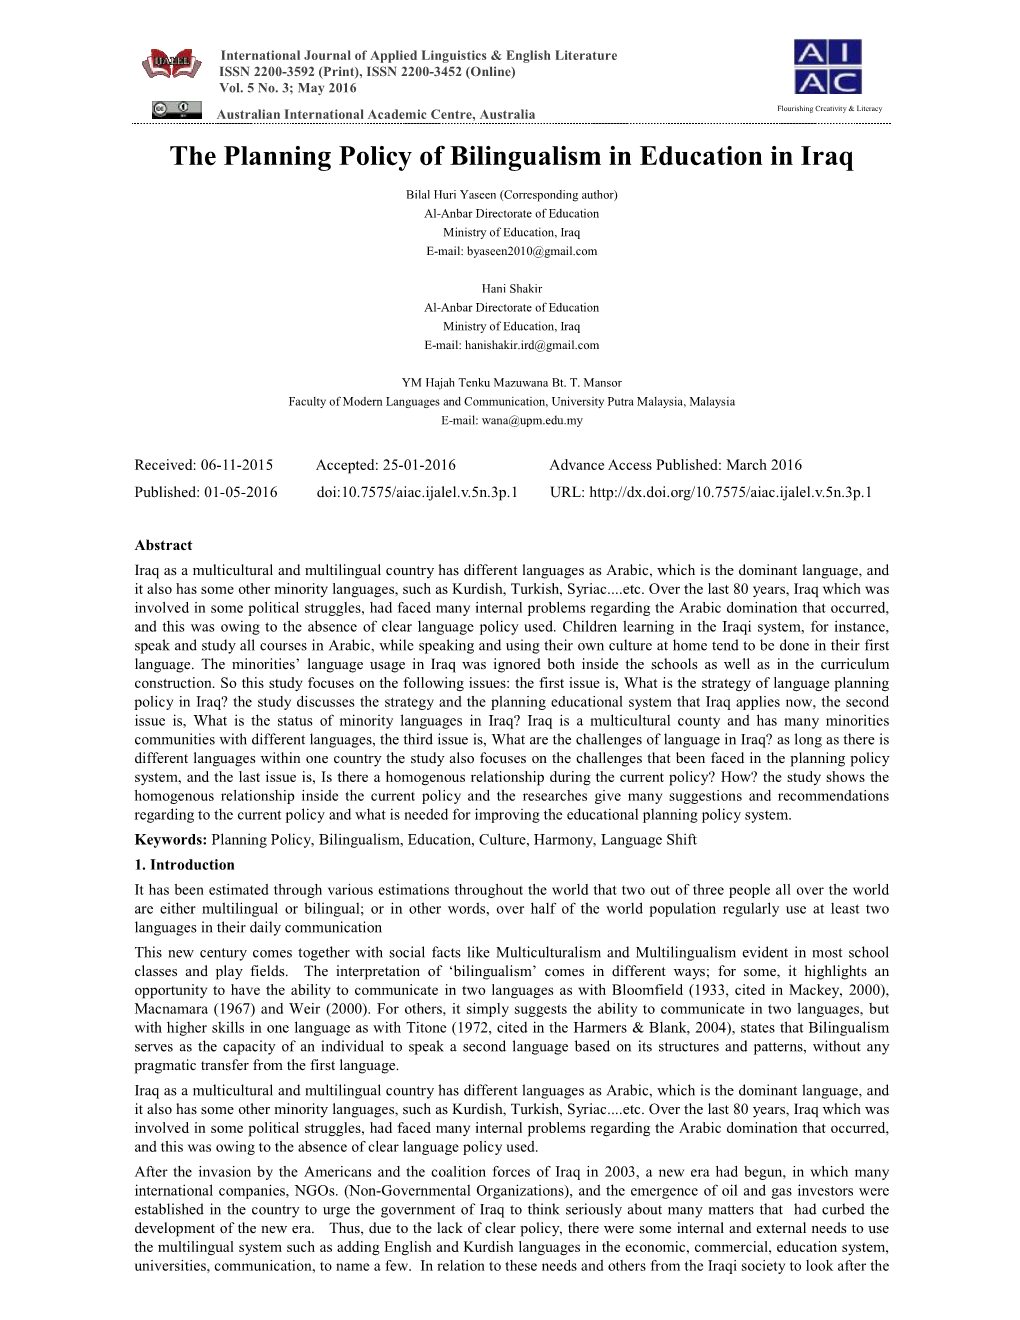 The Planning Policy of Bilingualism in Education in Iraq